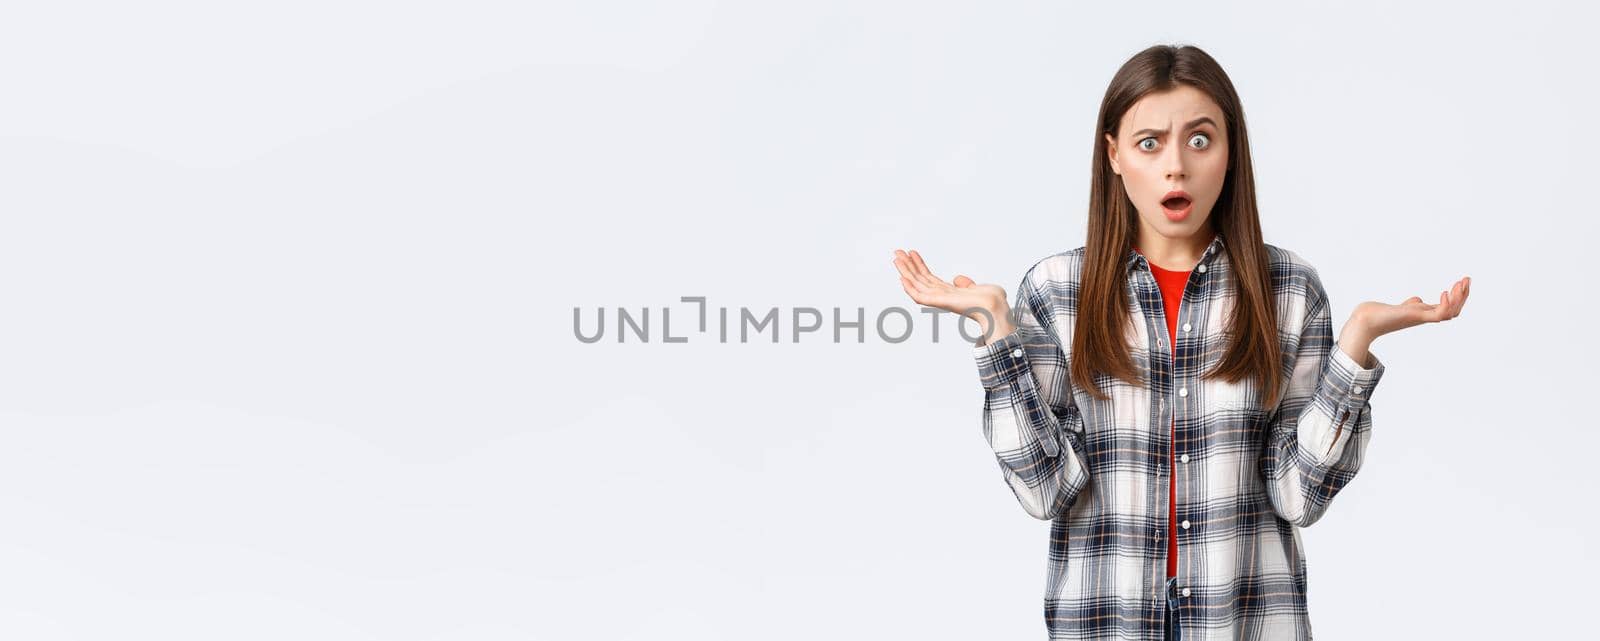 Lifestyle, different emotions, leisure activities concept. Confused and surprised young woman gasping, drop jaw and stare startled from big news, spread hands sideways, unexpected situation.